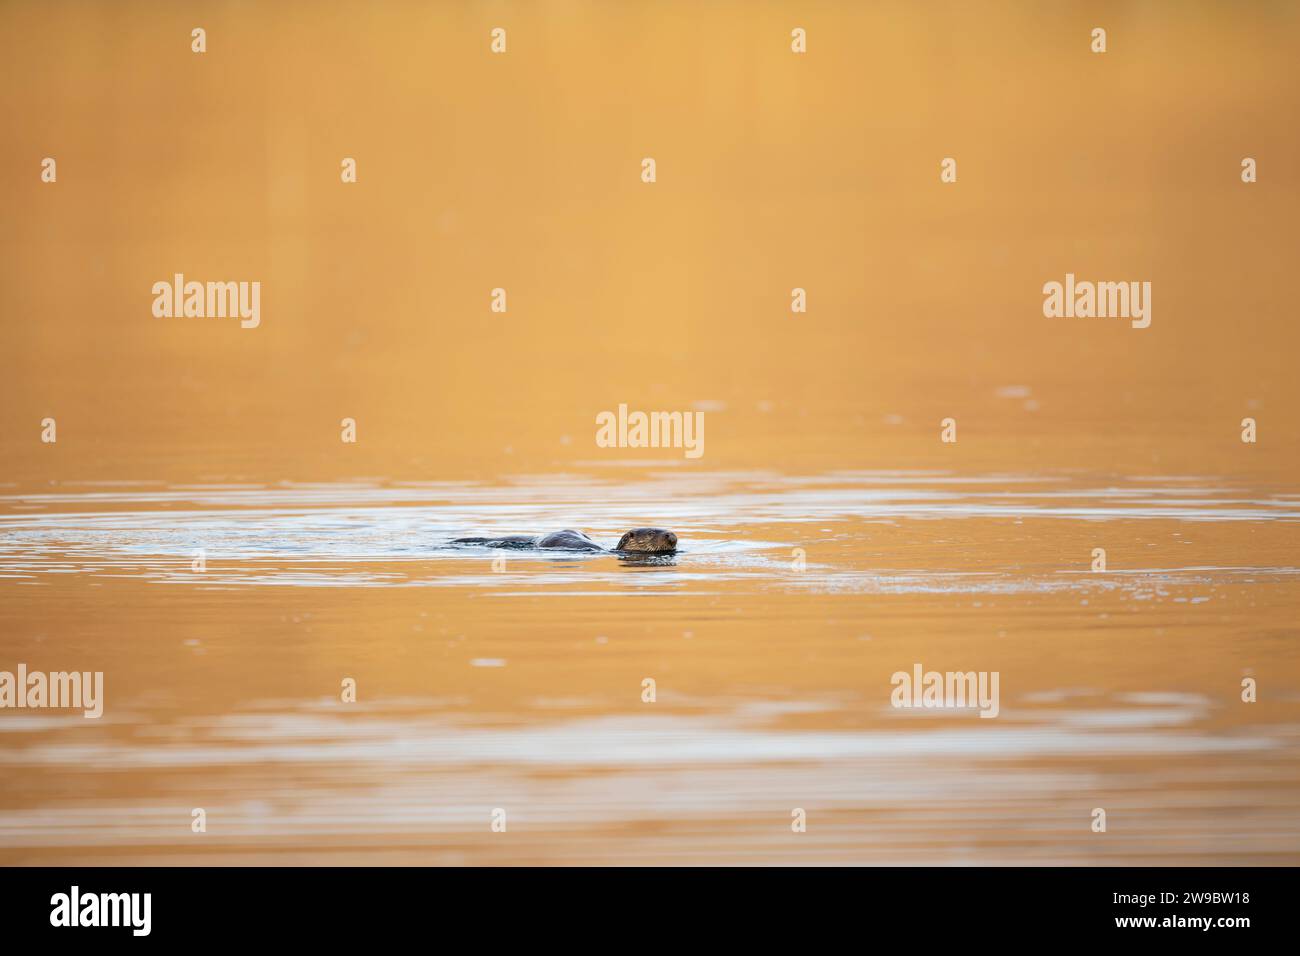 European otter (Lutra lutra) swimming in a golden pond Stock Photo